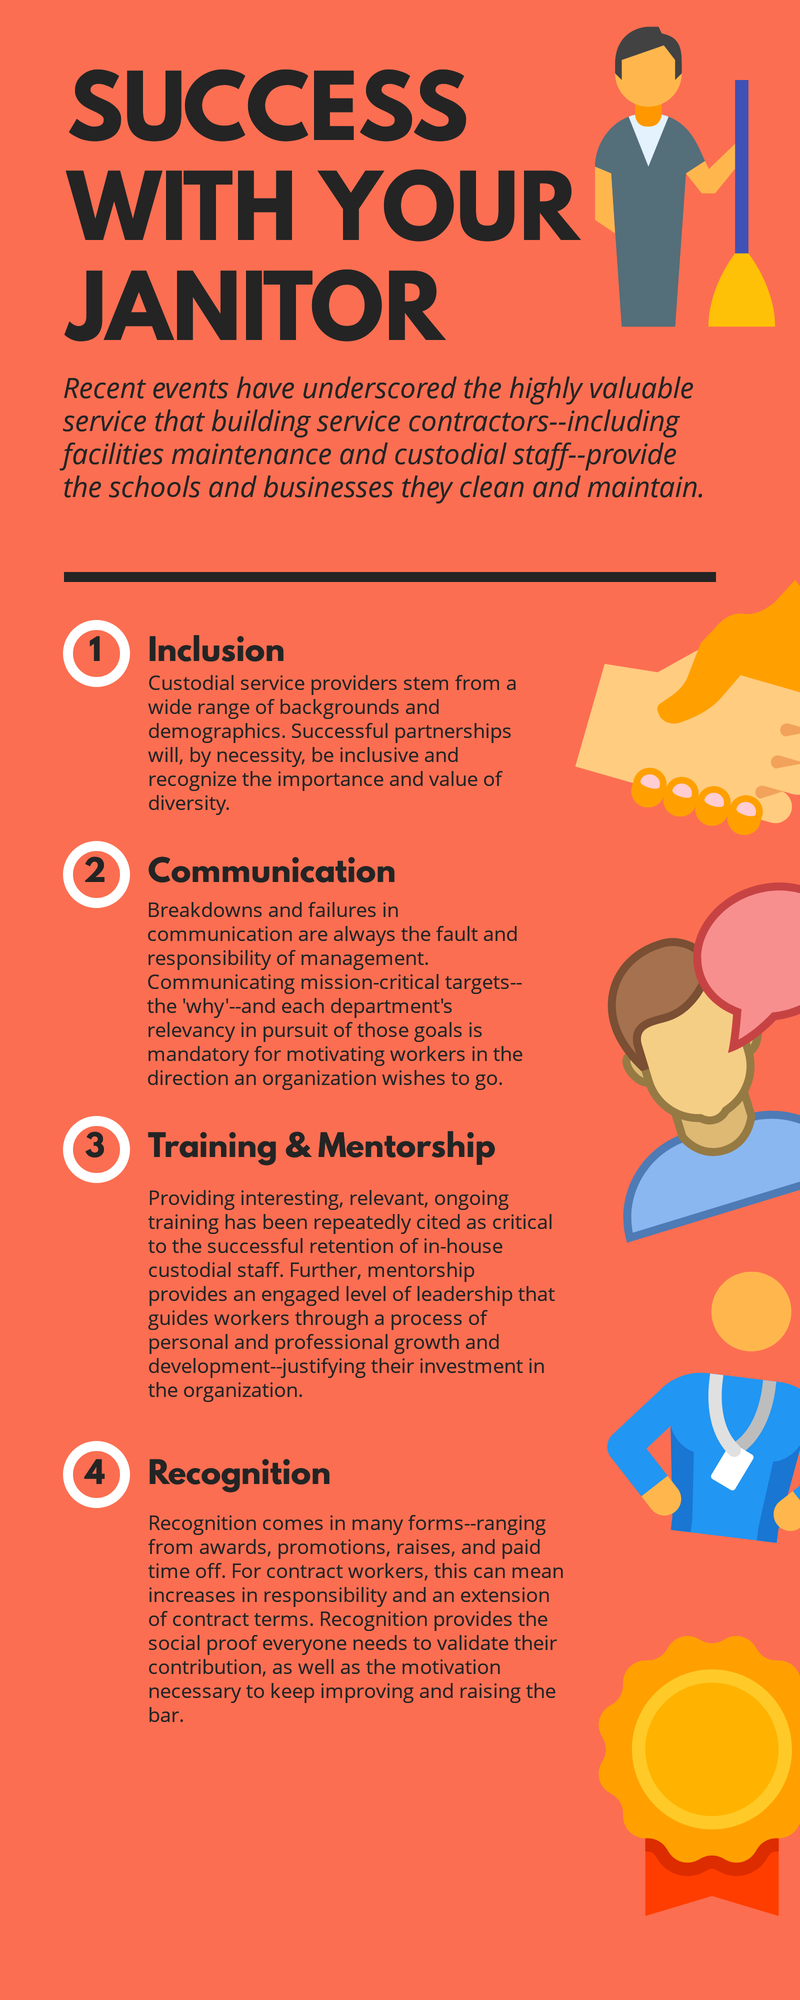 Tips for Success With Your Janitor - Infographic